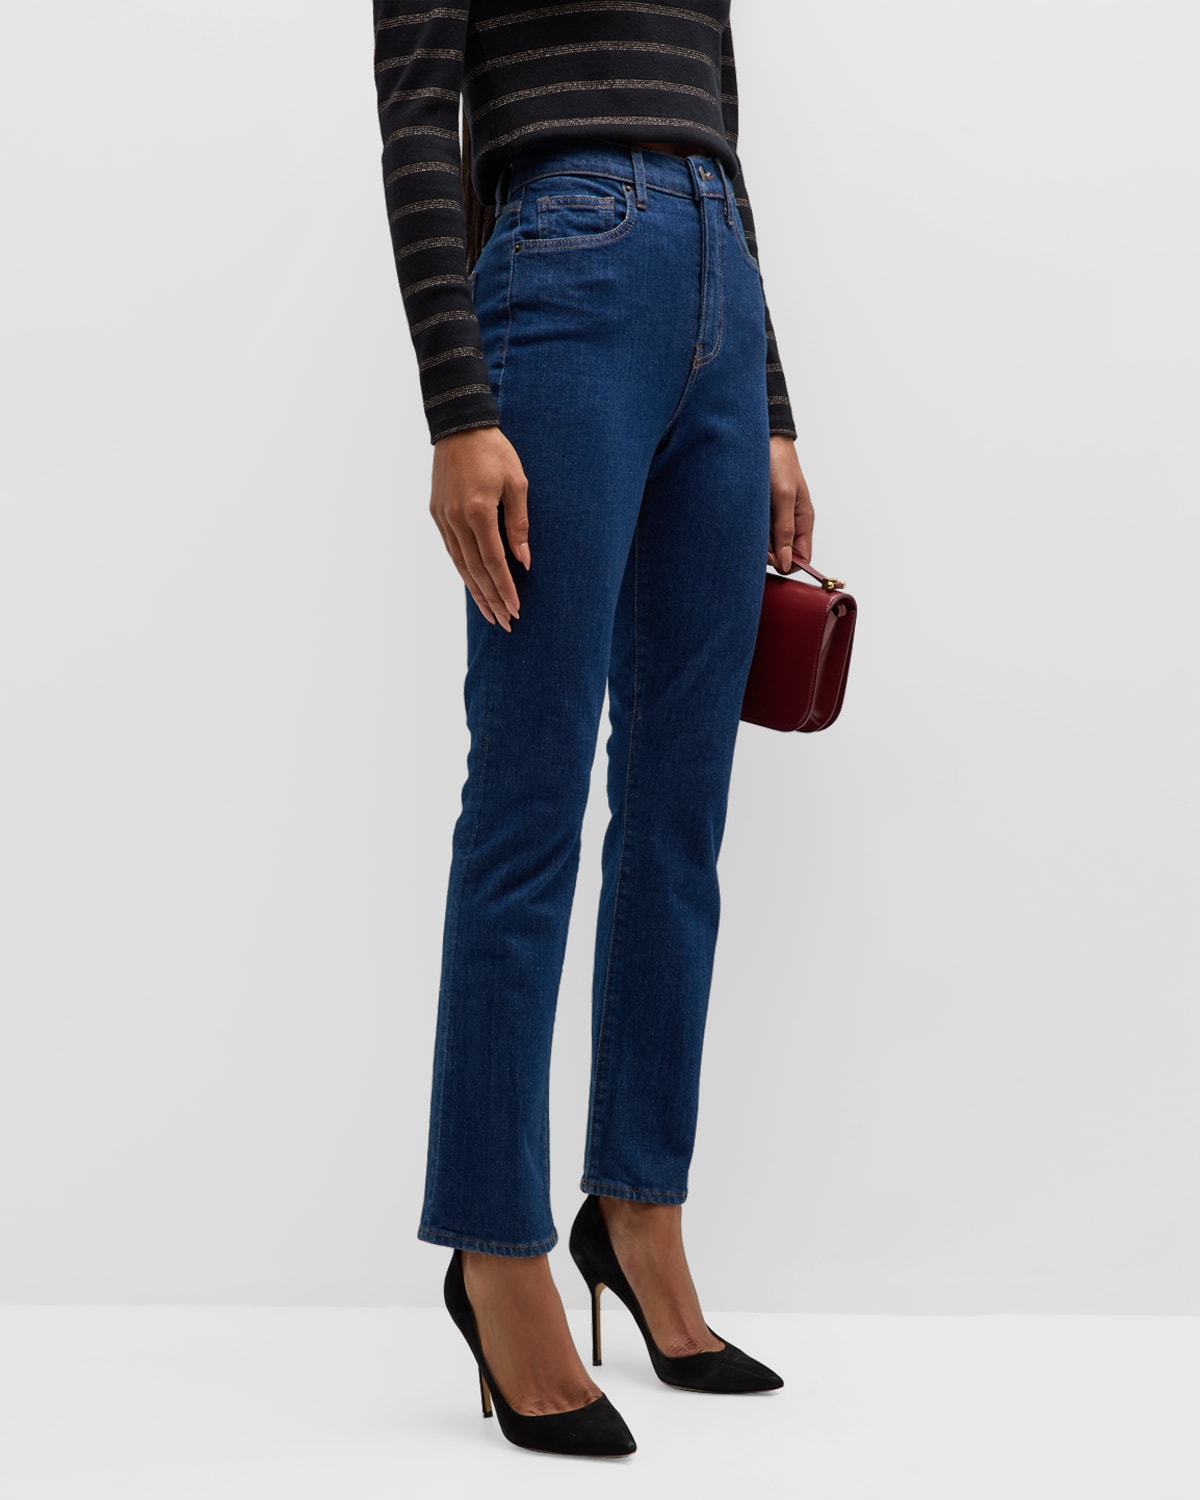 Shop Veronica Beard Jeans Alenah Slim Straight Jeans In Rodeo Clea